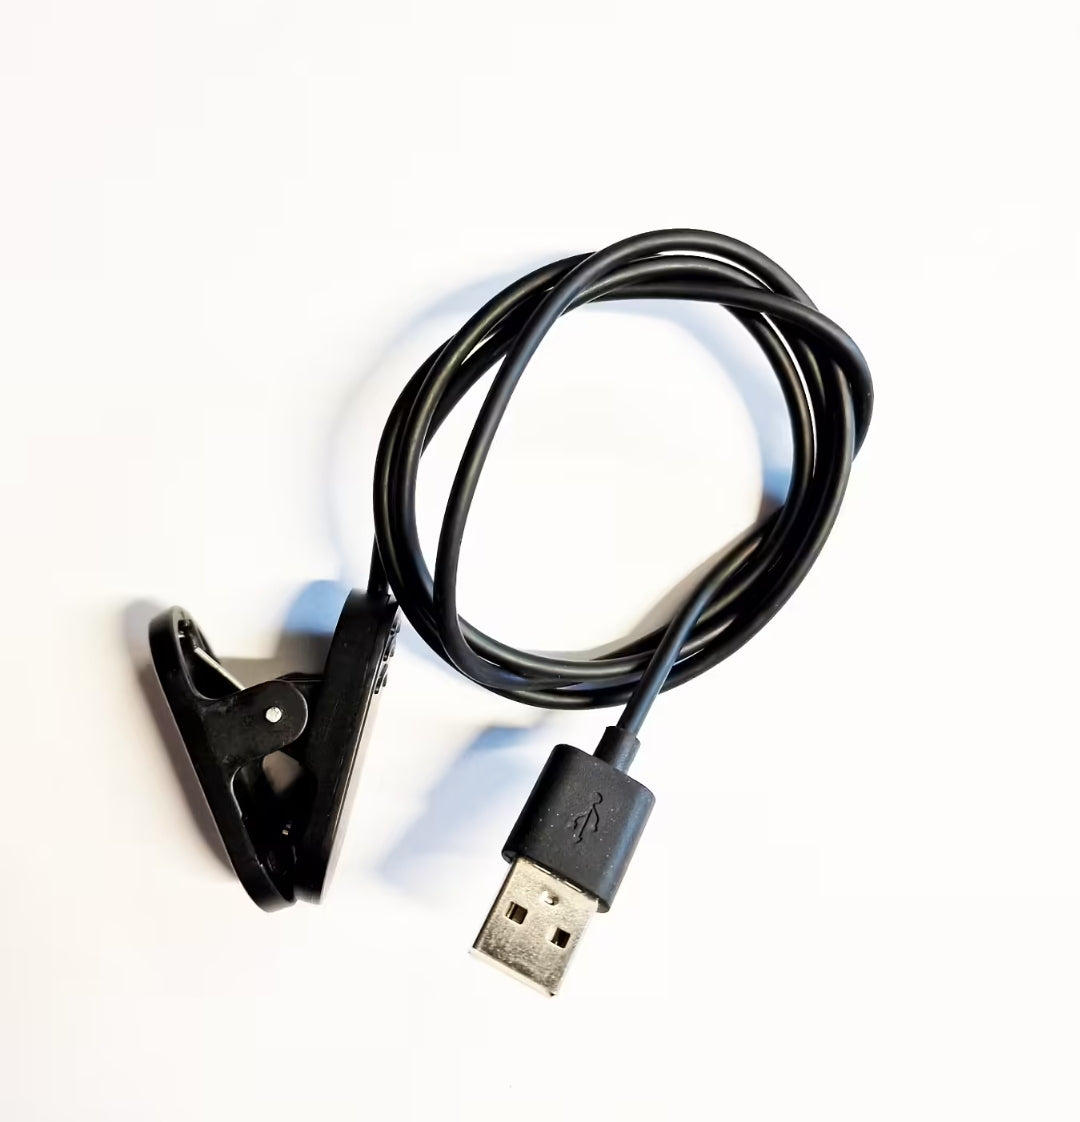 Spintso S1 Pro USB Charger Cable